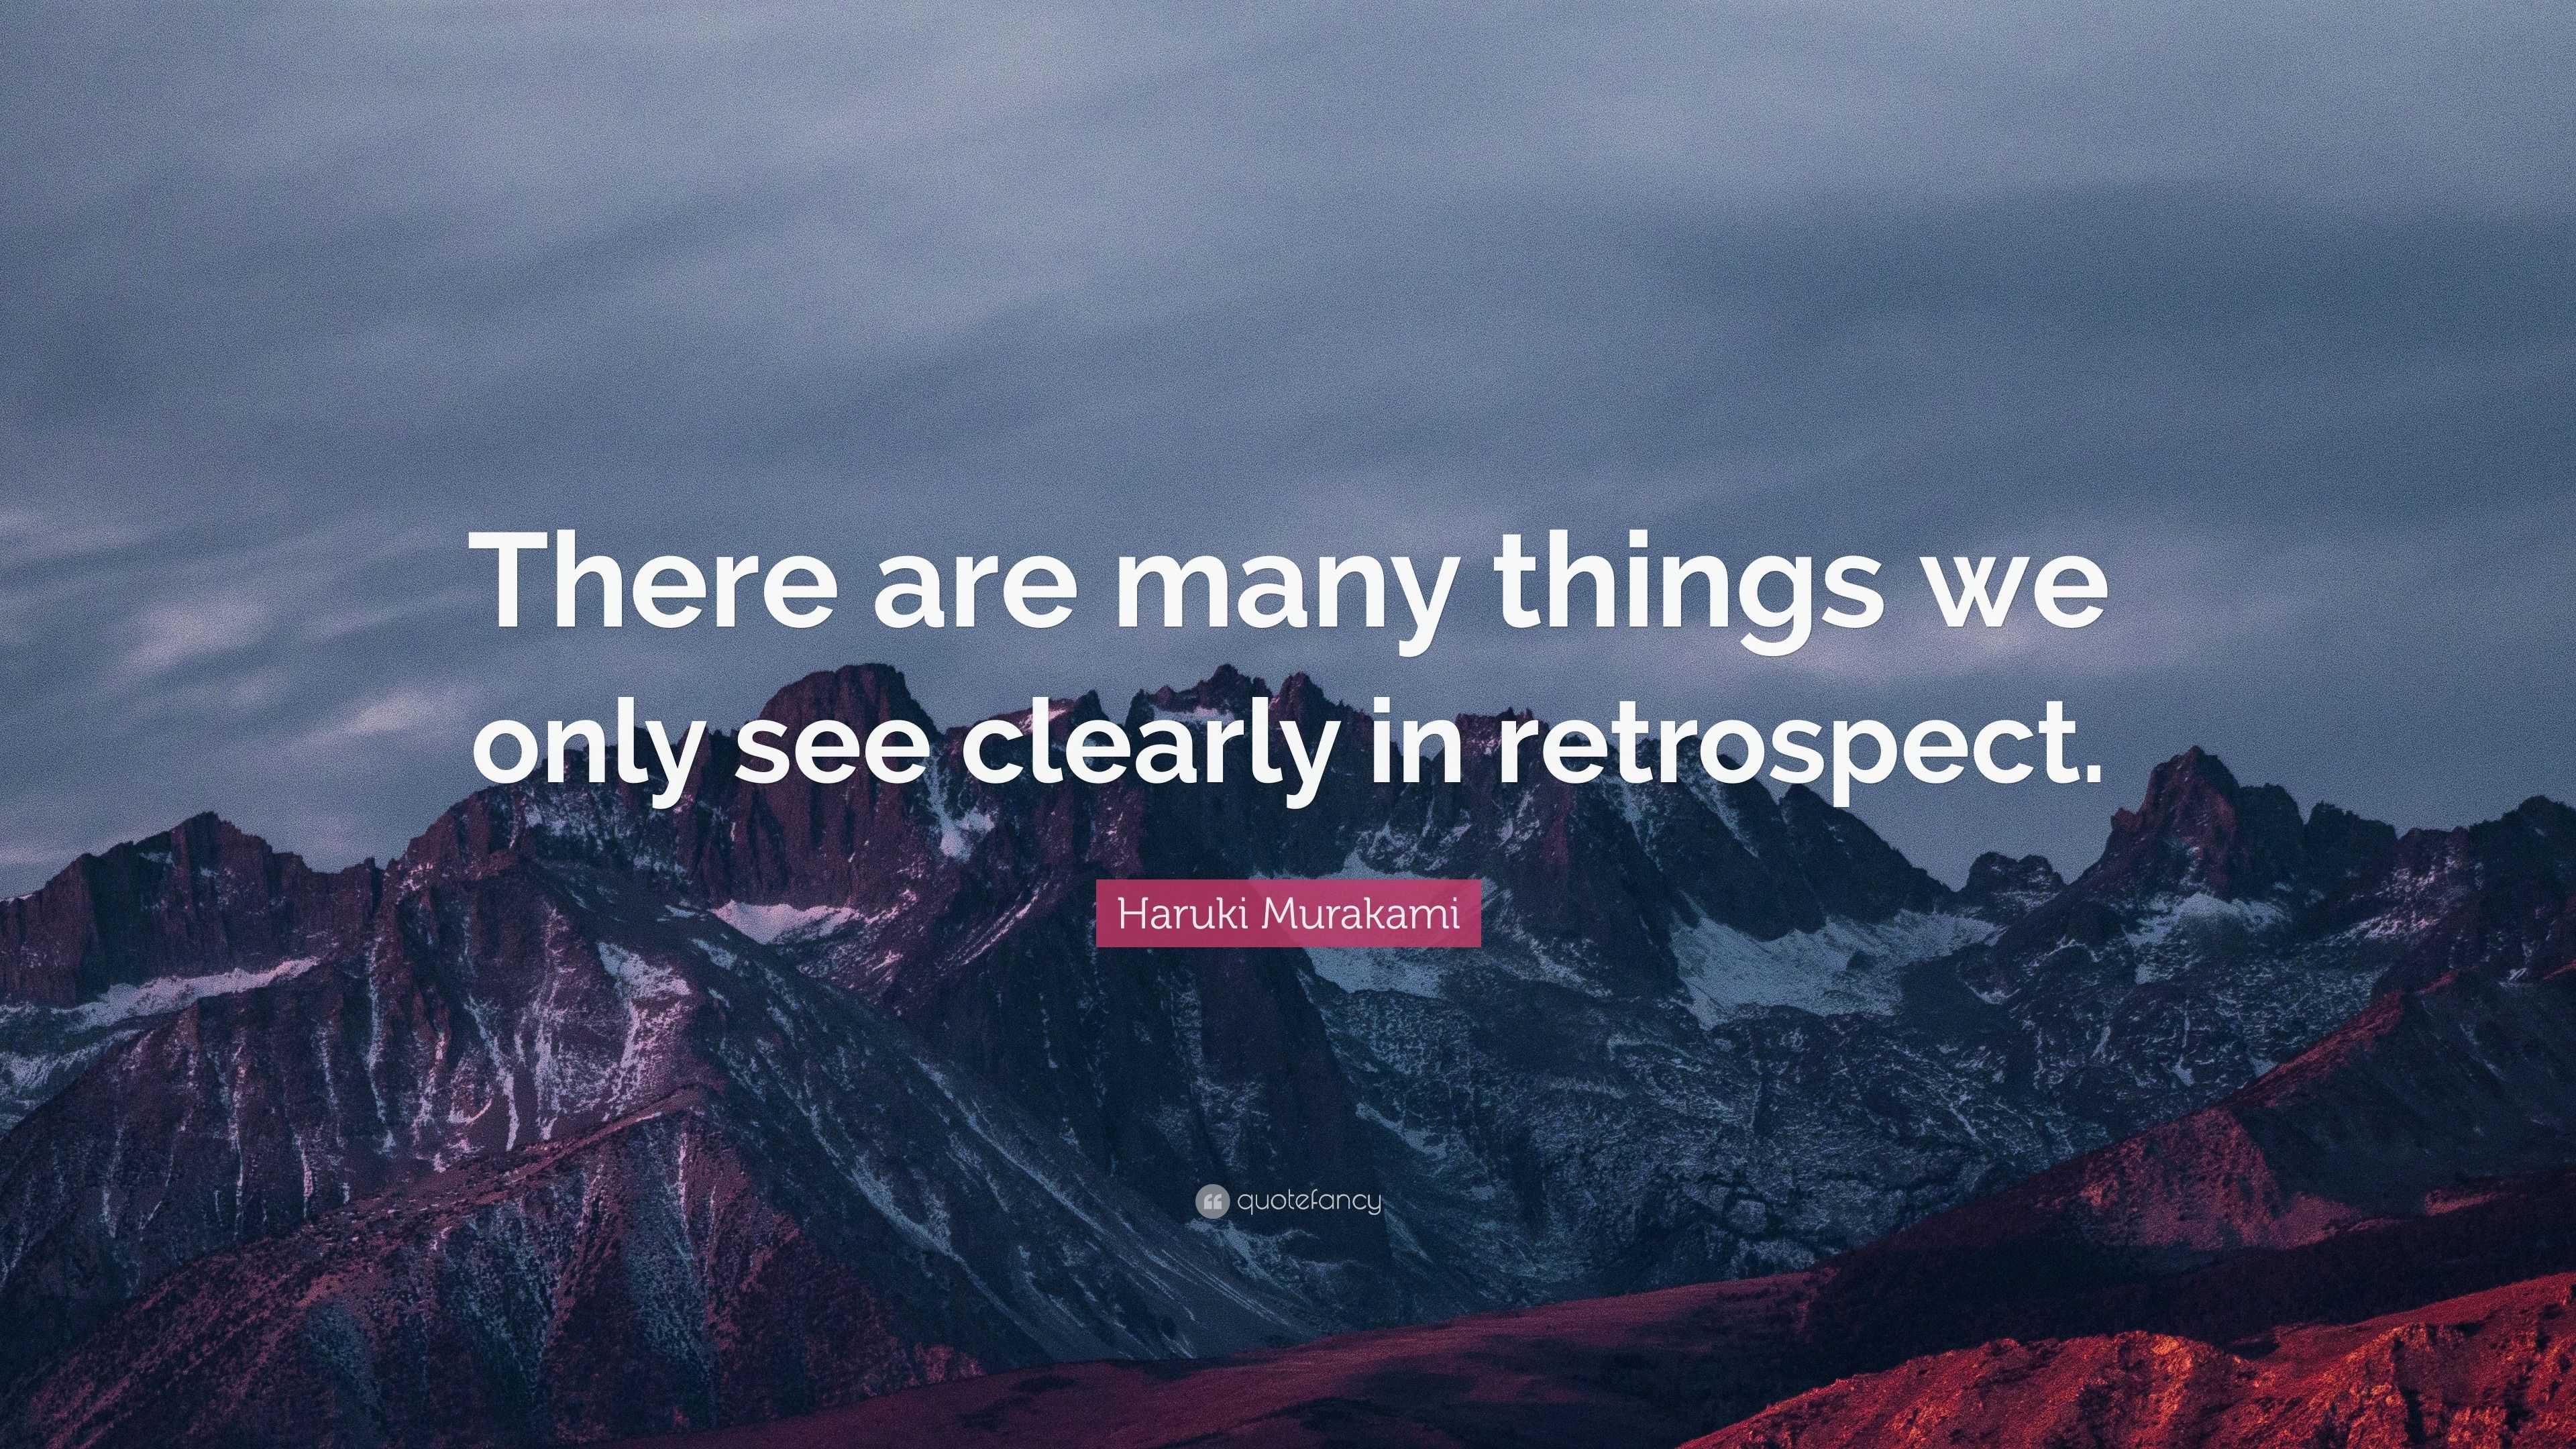 18+ Quote About Seeing Clearly